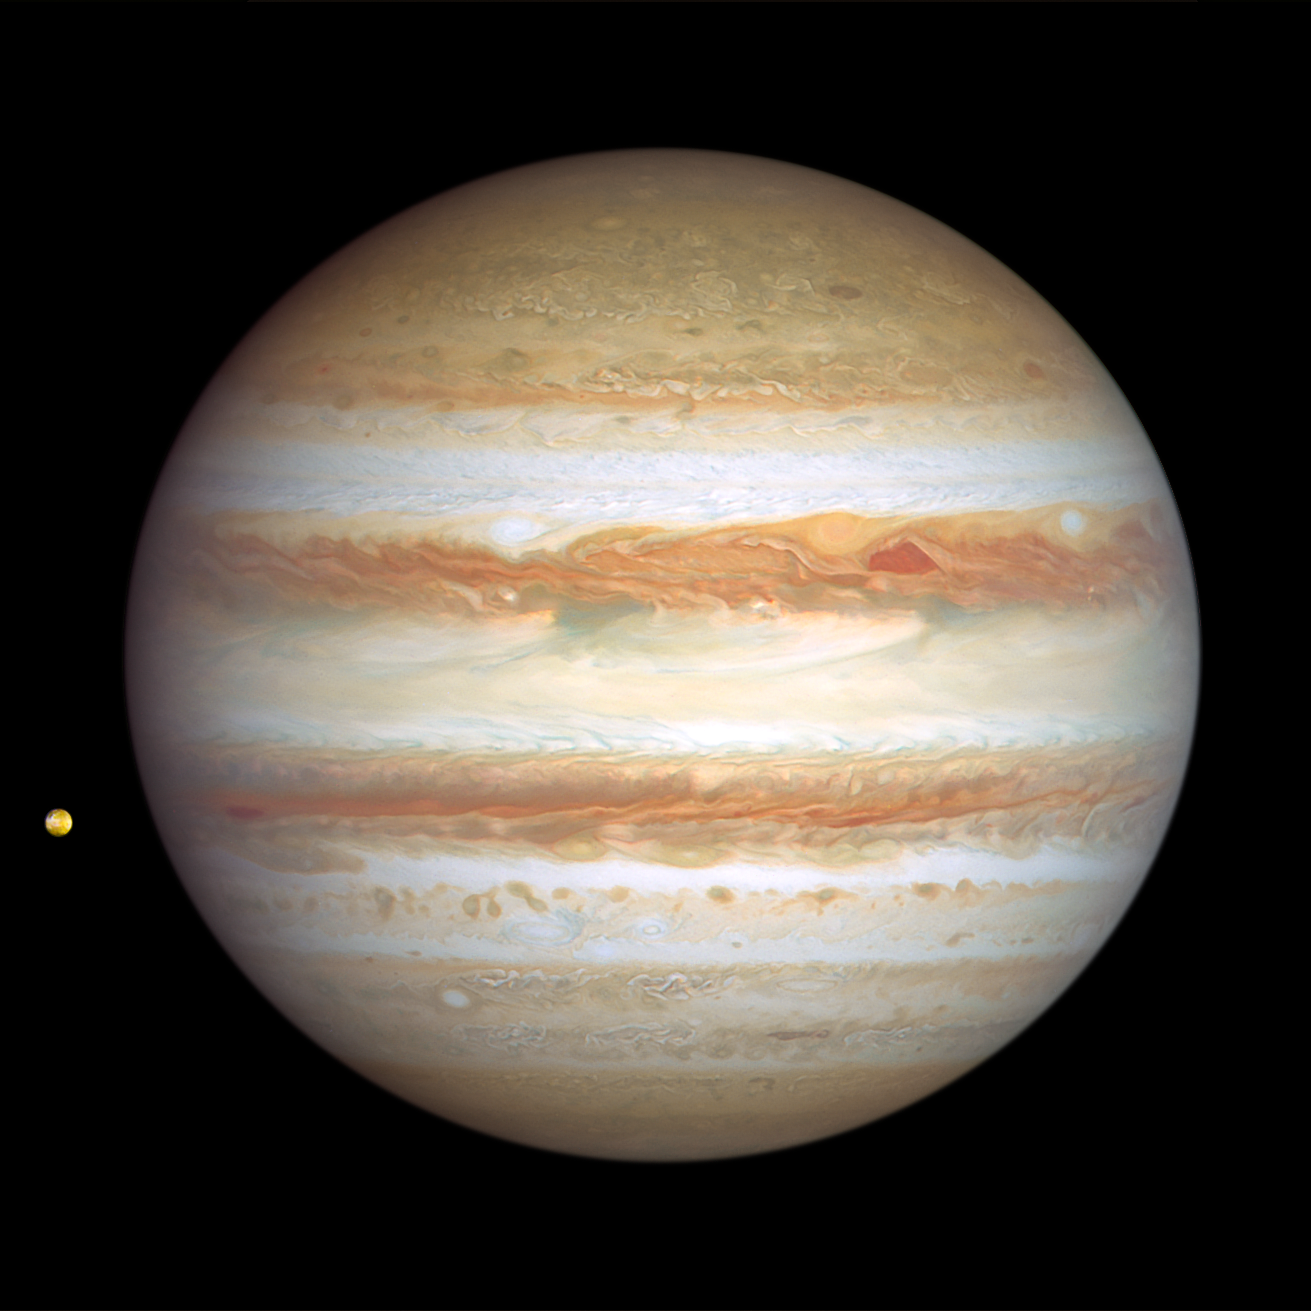 Image of Jupiter taken on January 6, 2024. This side of Jupiter is also banded in stripes of brownish orange, light gray, soft yellow, and shades of cream, with many large storms and small white clouds punctuating the planet. At upper right of center, a pair of storms appear next to each other: a deep-red, triangle-shaped cyclone and a reddish anticyclone. Toward the far-left edge of this view is Jupiter's tiny orange-colored moon Io.